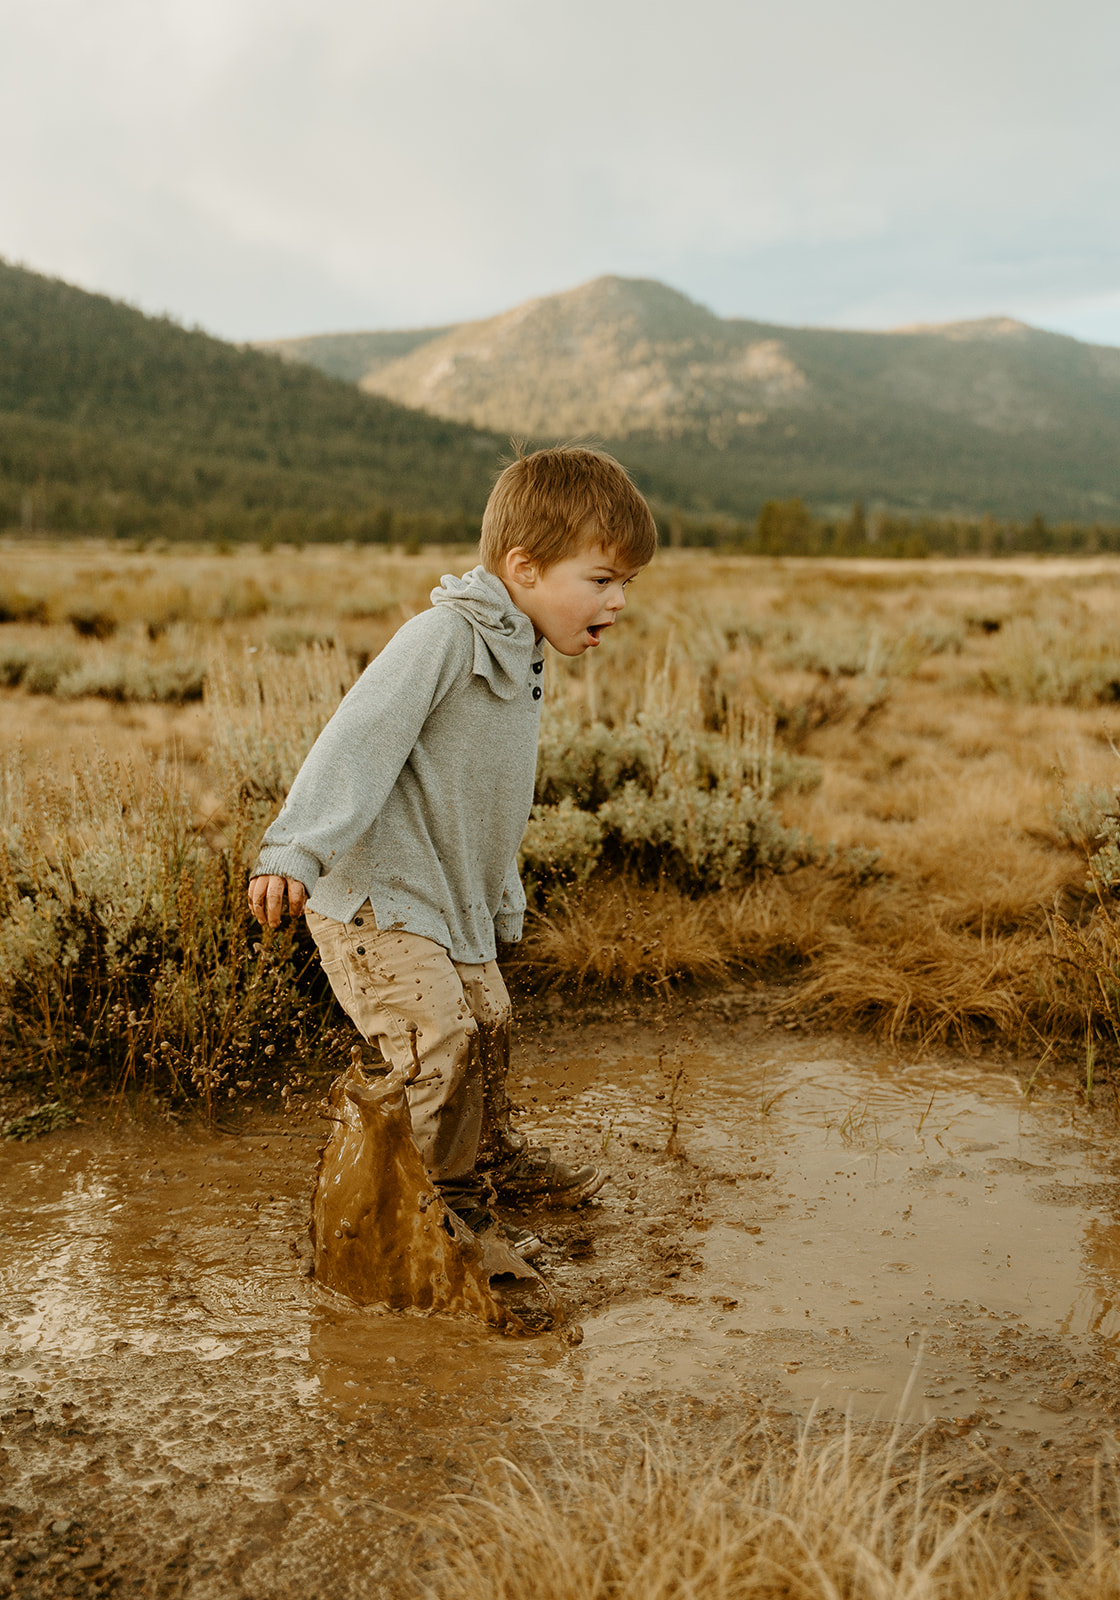 letting boys be boys during our family photoshoot while stomping in the mud for fun family photos.